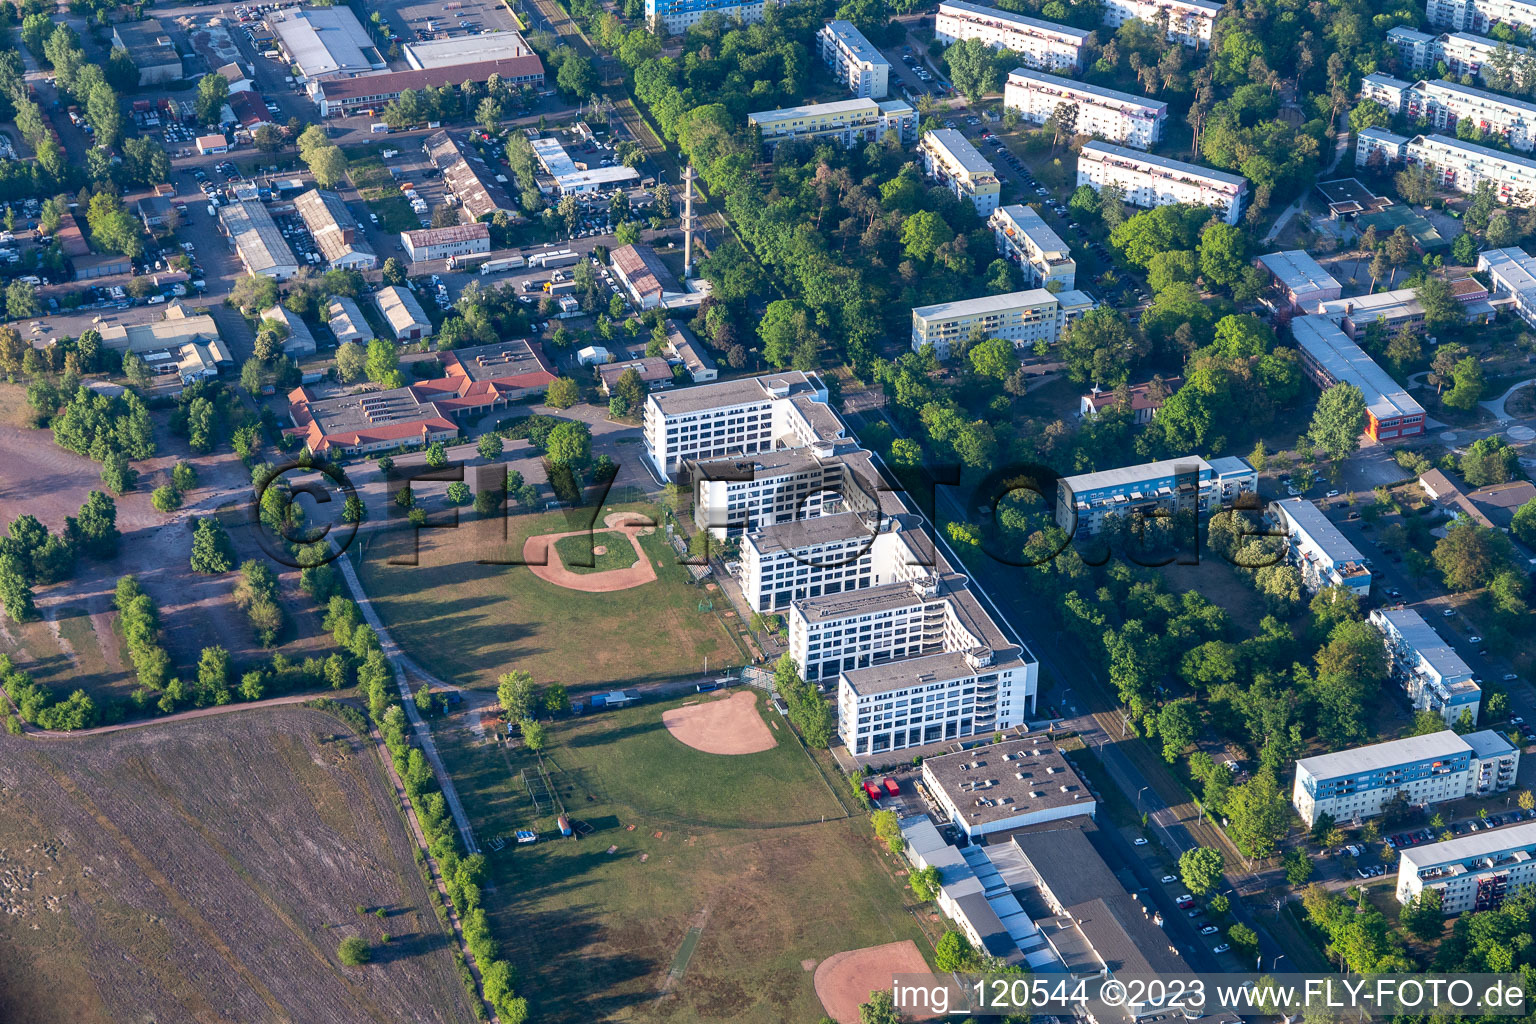 Cooperative university on Erzbergerstrasse in the district Nordstadt in Karlsruhe in the state Baden-Wuerttemberg, Germany